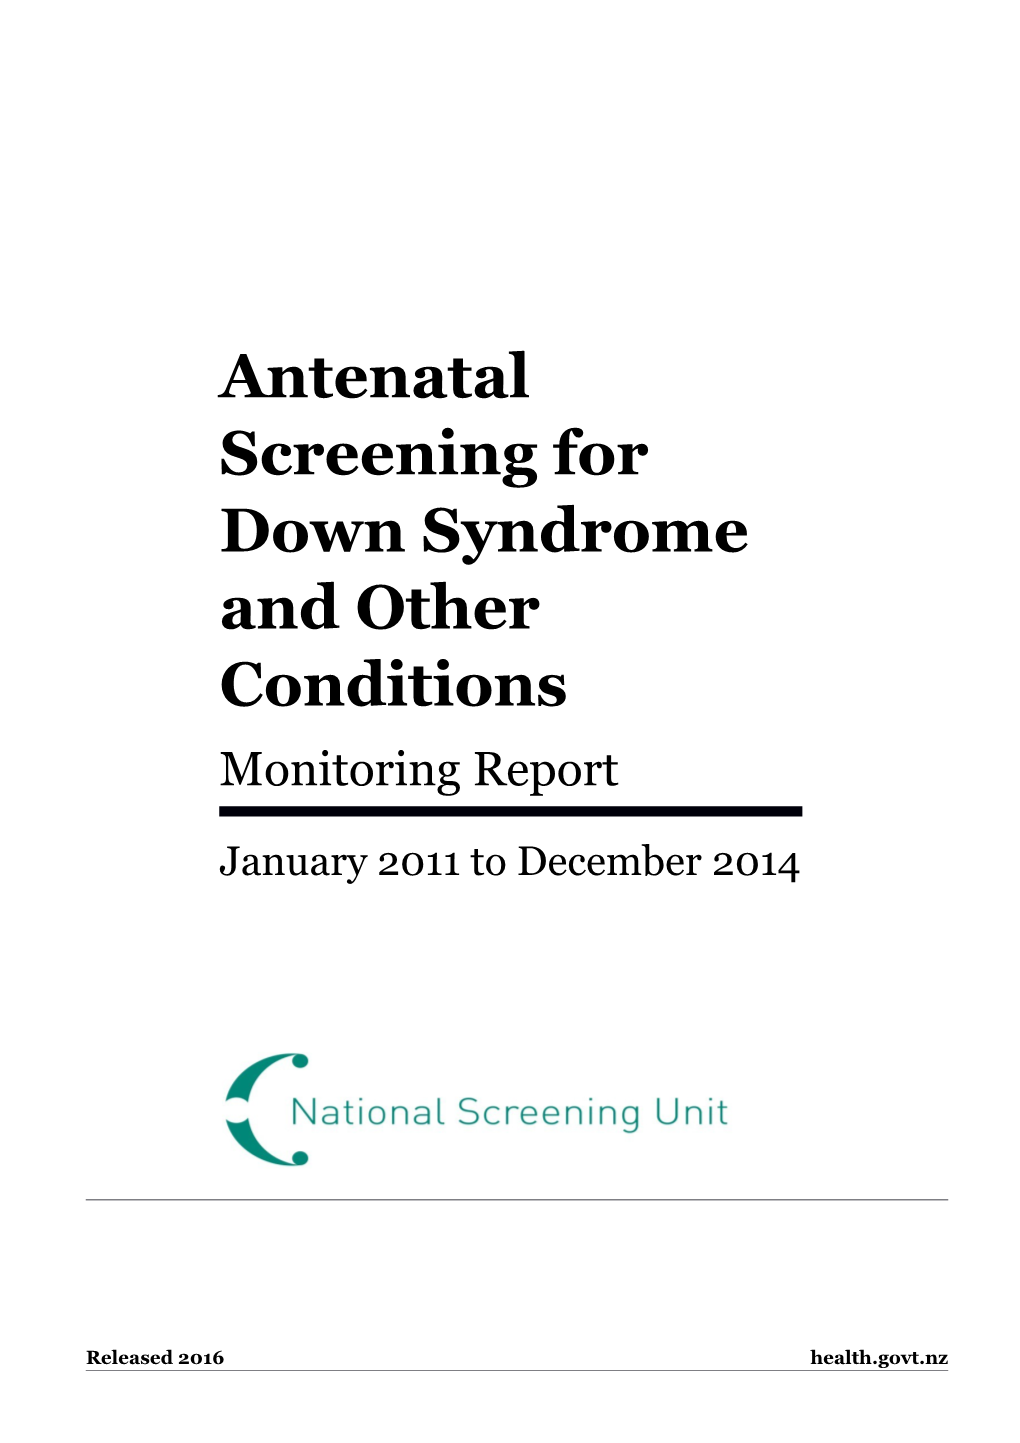 Antenatal Screening for Down Syndrome and Other Conditions Monitoring Report: January 2011